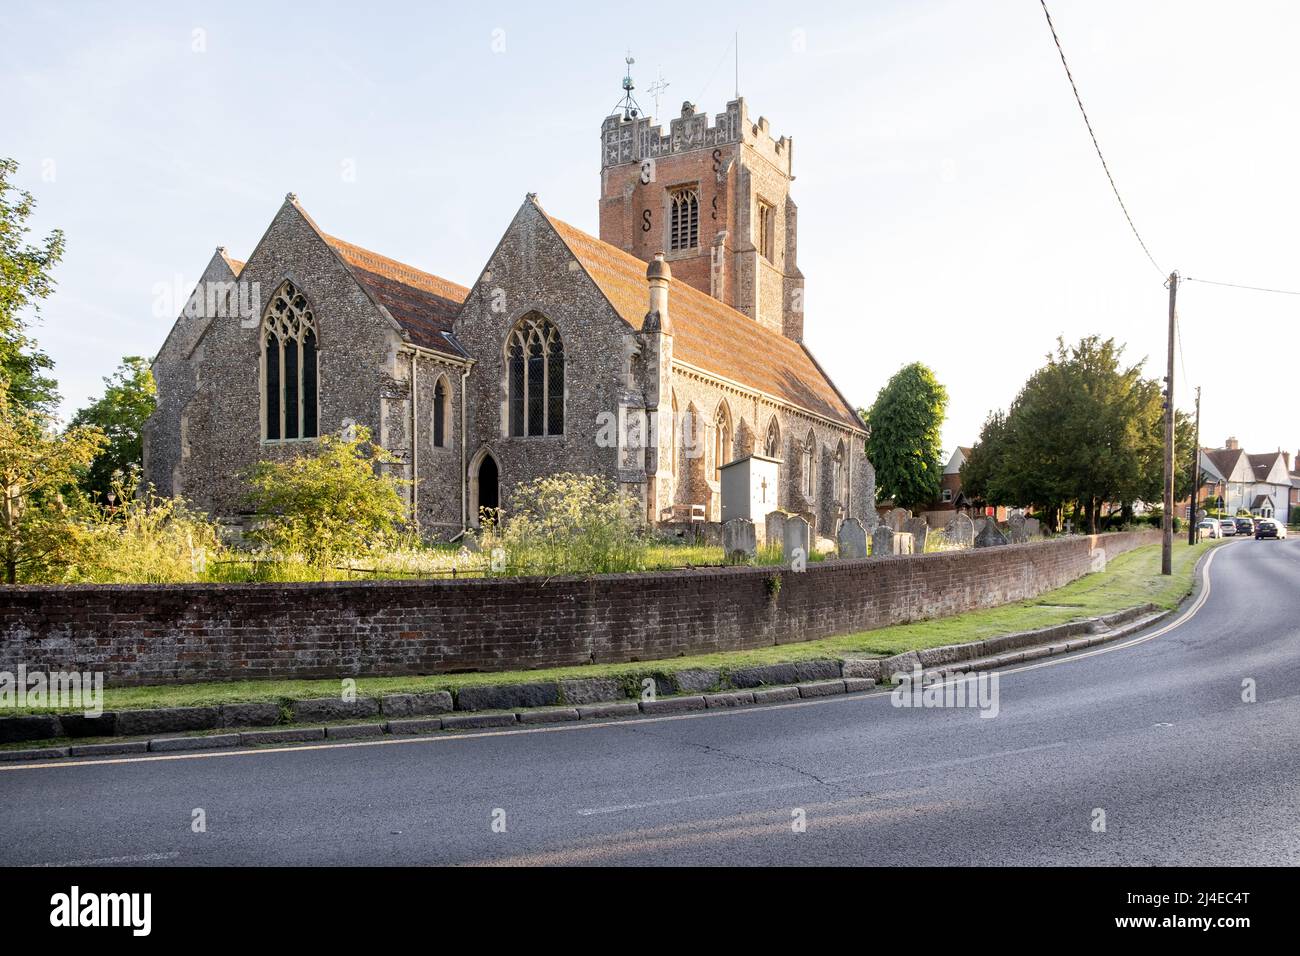 The church and churchyard of the Anglican Parish Church of St. Andrew in the Essex village of Earls Colne Stock Photo